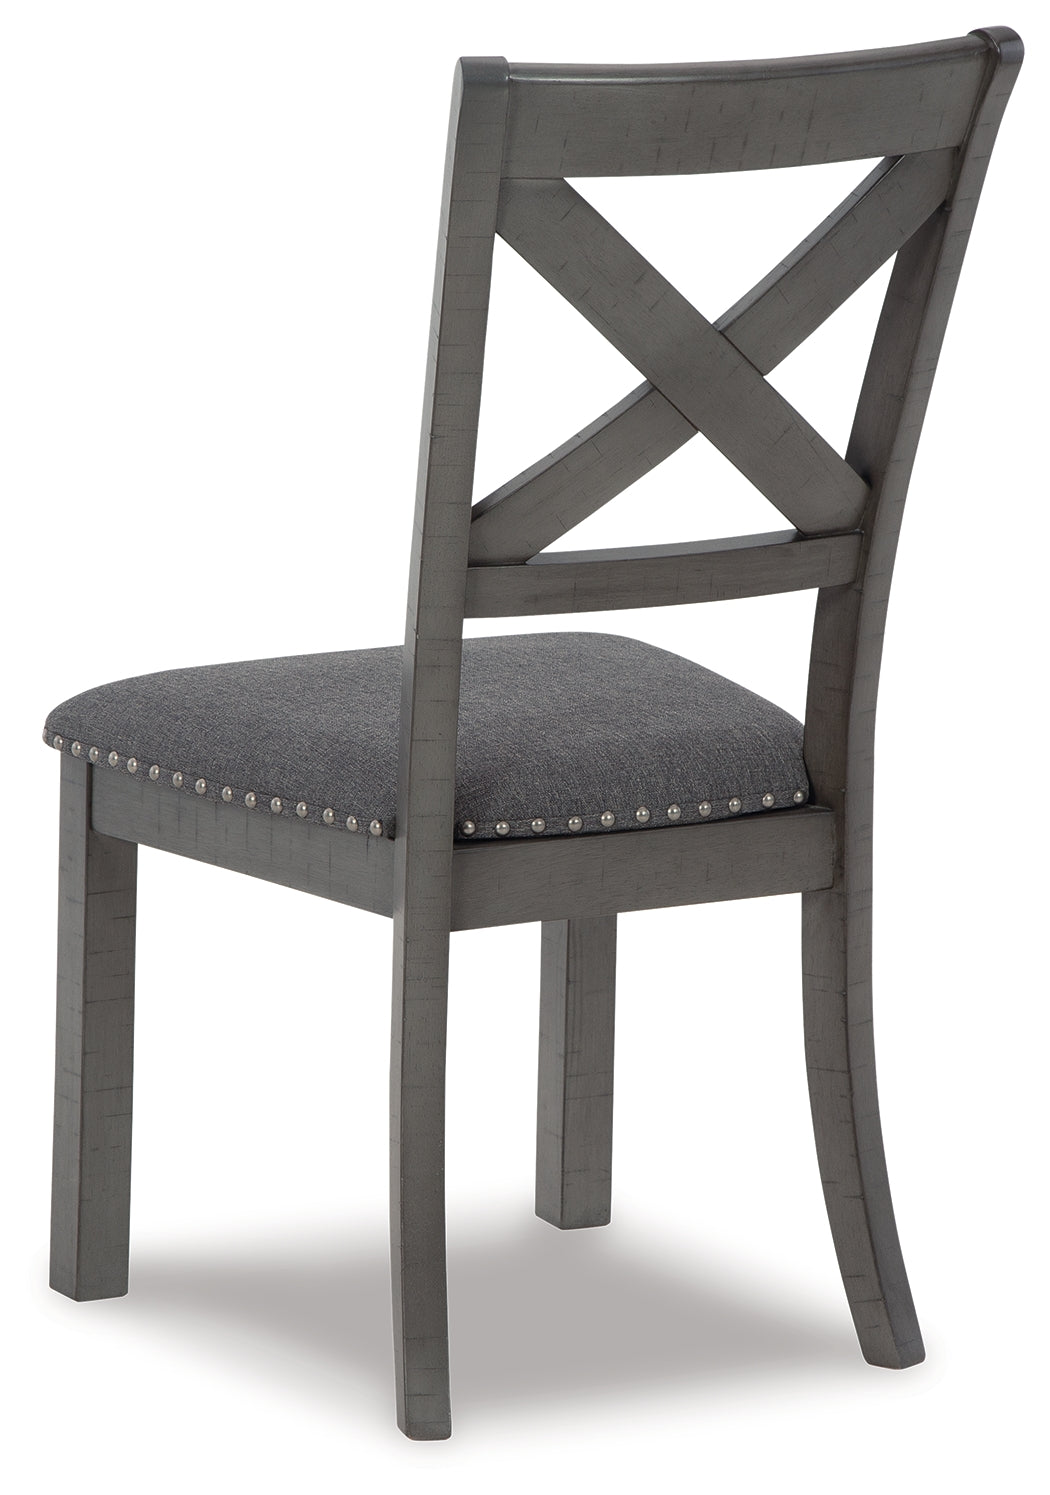 Gray Myshanna Dining Table and 6 Chairs with Storage - PKG013282